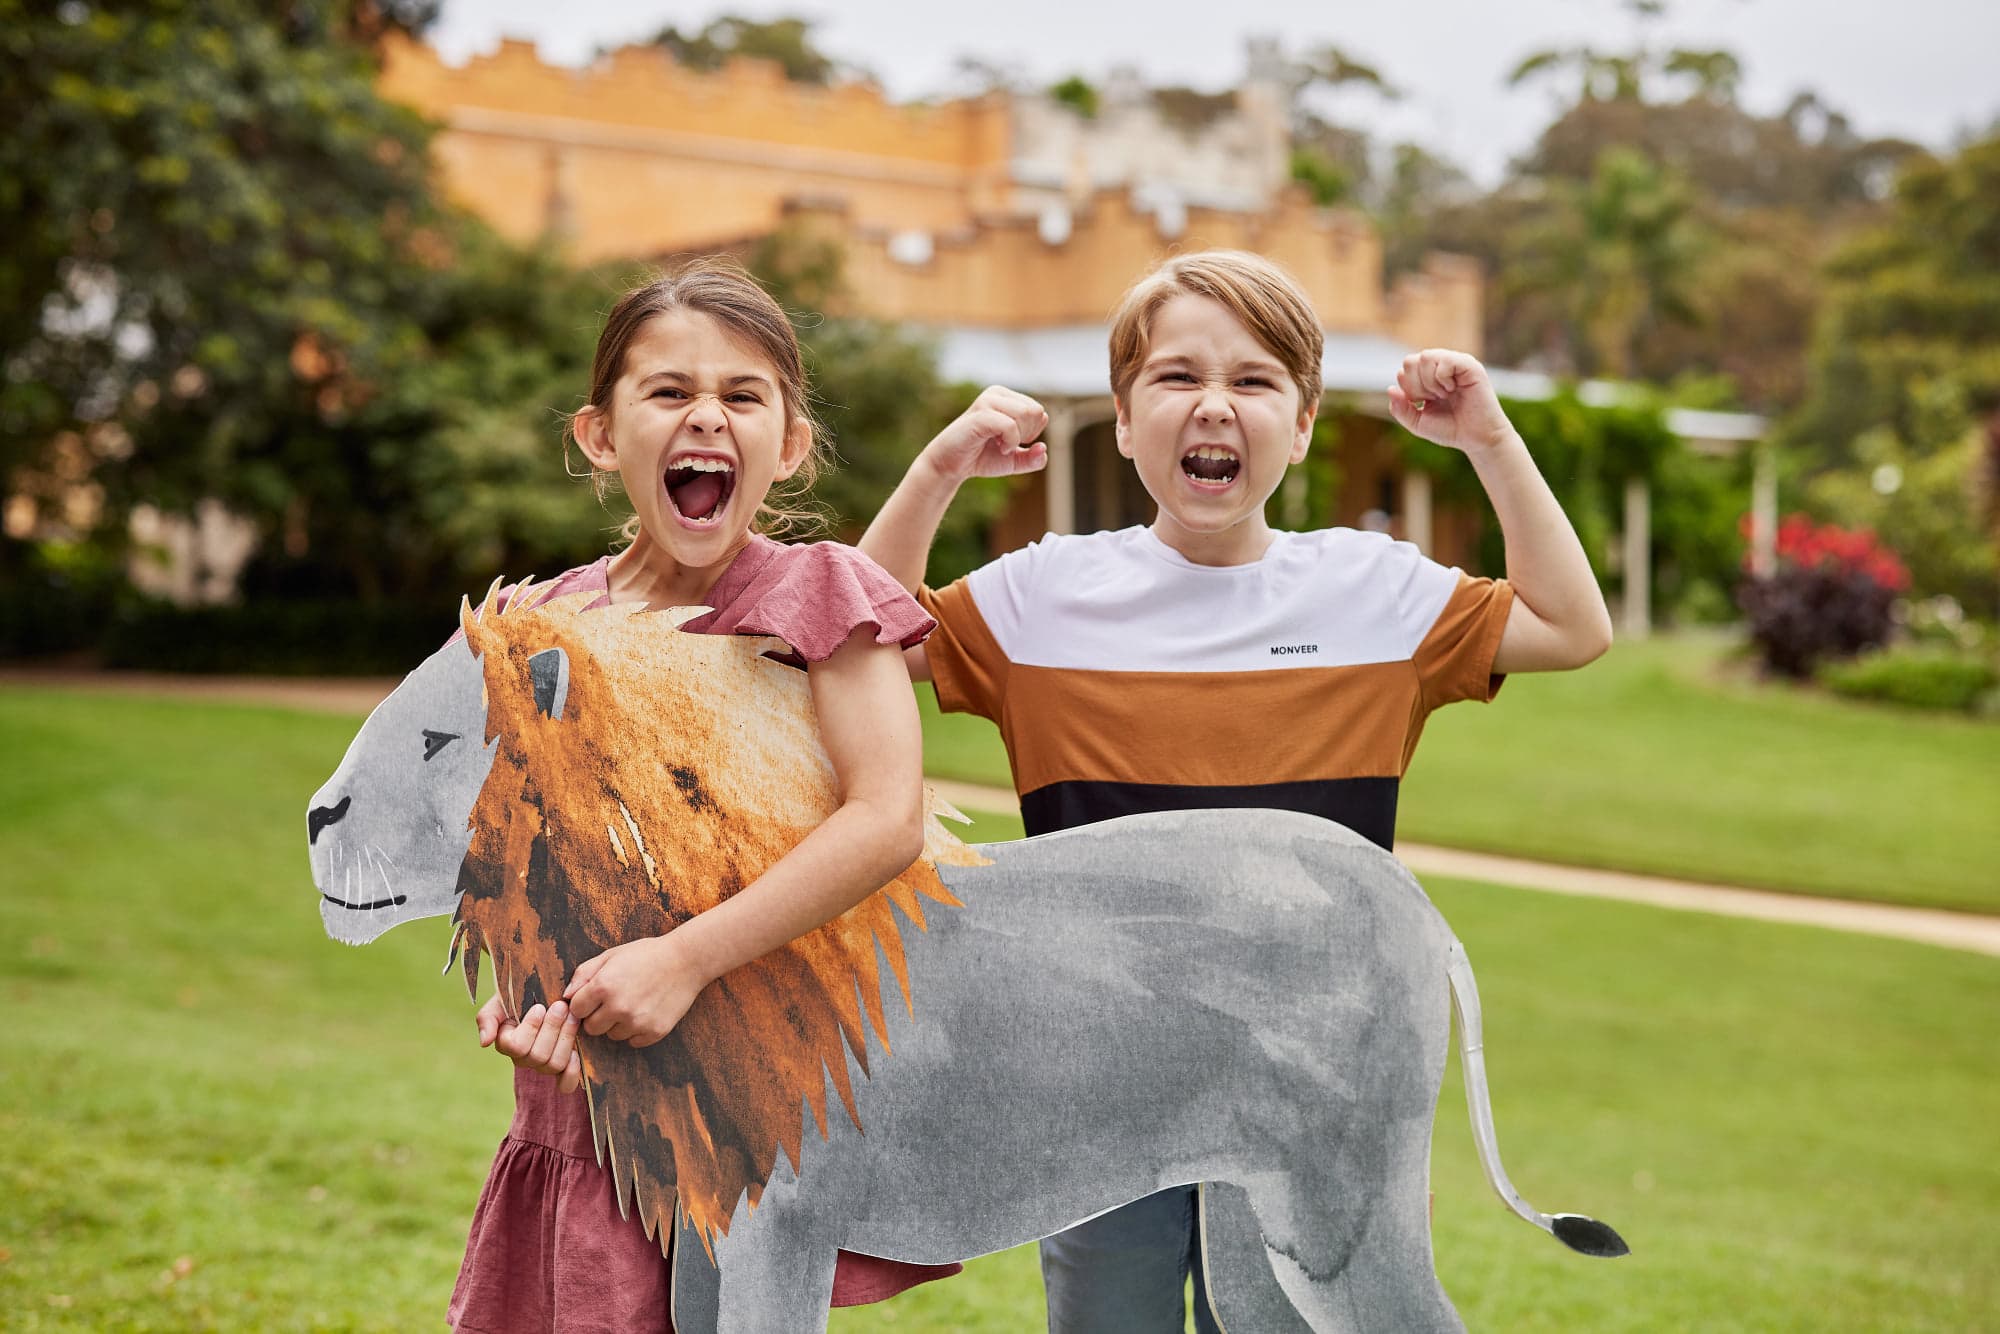 Sydney And New Zealand Family Travel In 2023 Wildlife Retreat at Taronga is an eco-retreat for the family to connect with nature, wildlife, and with each other. | Credit: Taronga Zoo Facebook